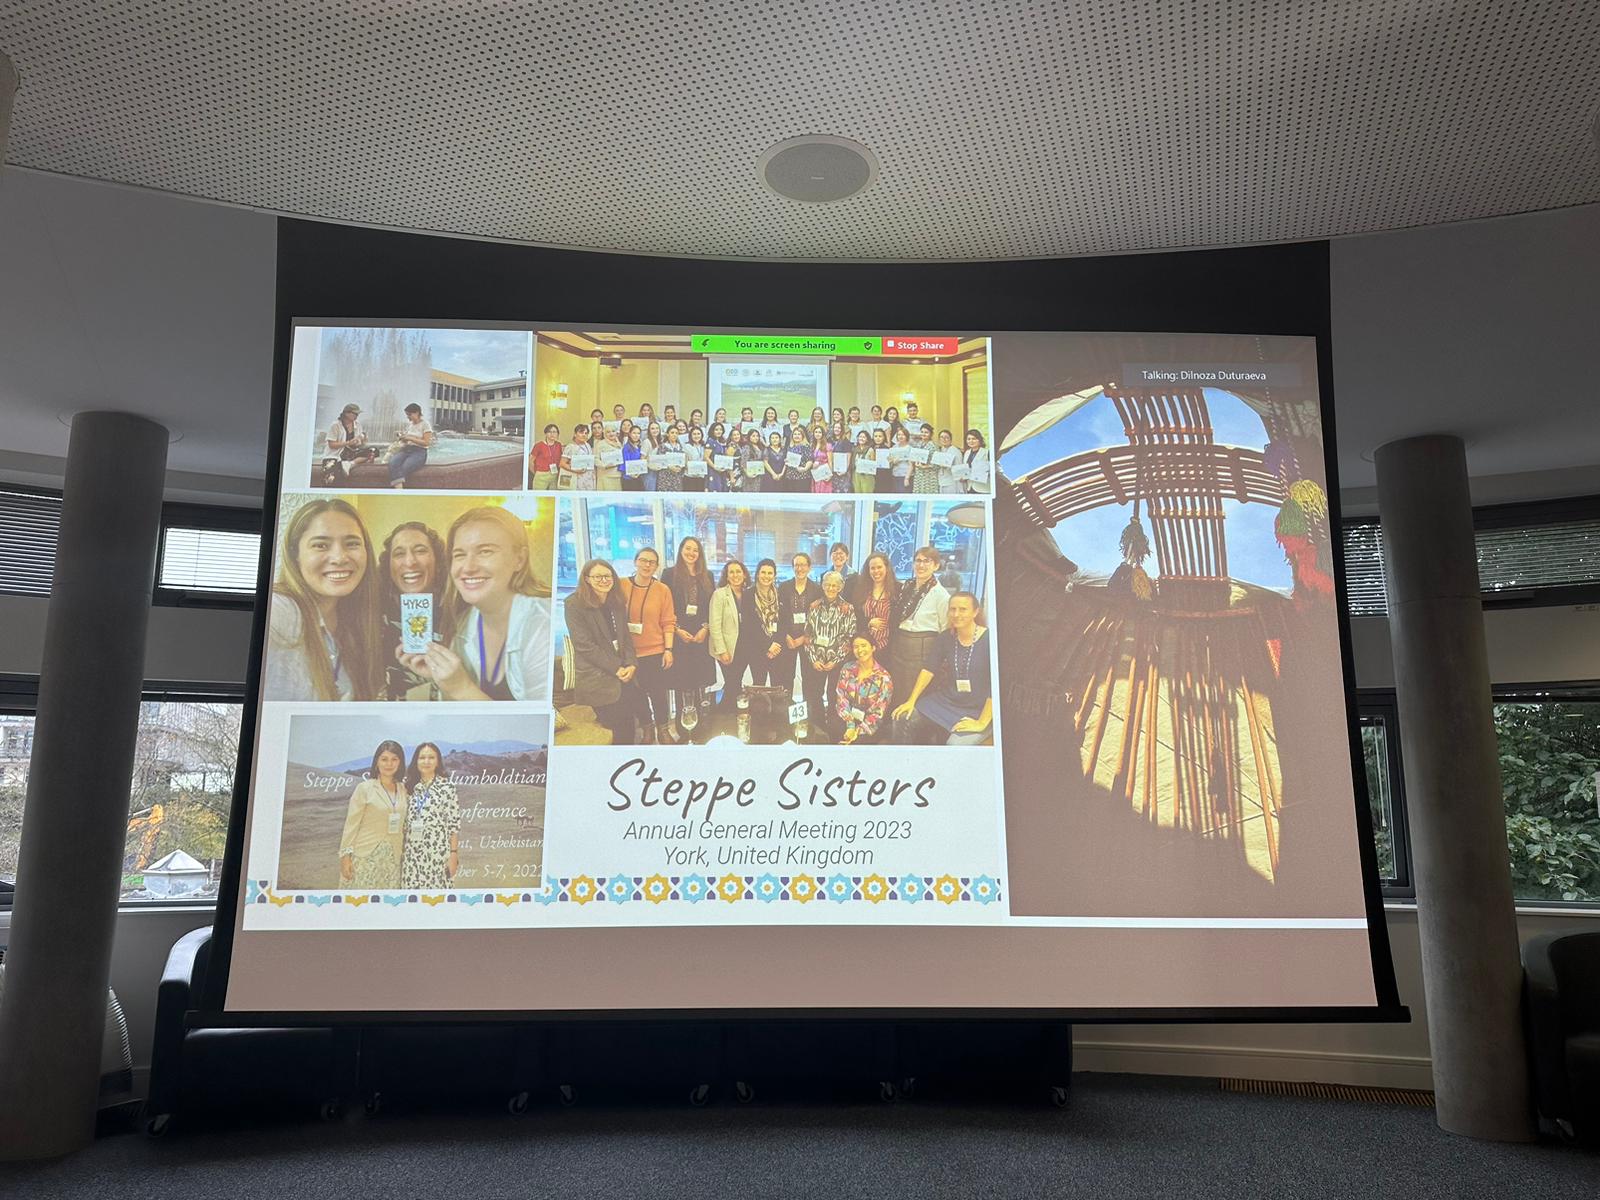 Conference presentation slide showing various photos from Steppe Sisters projects and meetings, presented at the Steppe Sisters Annual General Meeting 2023 in York, United Kingdom